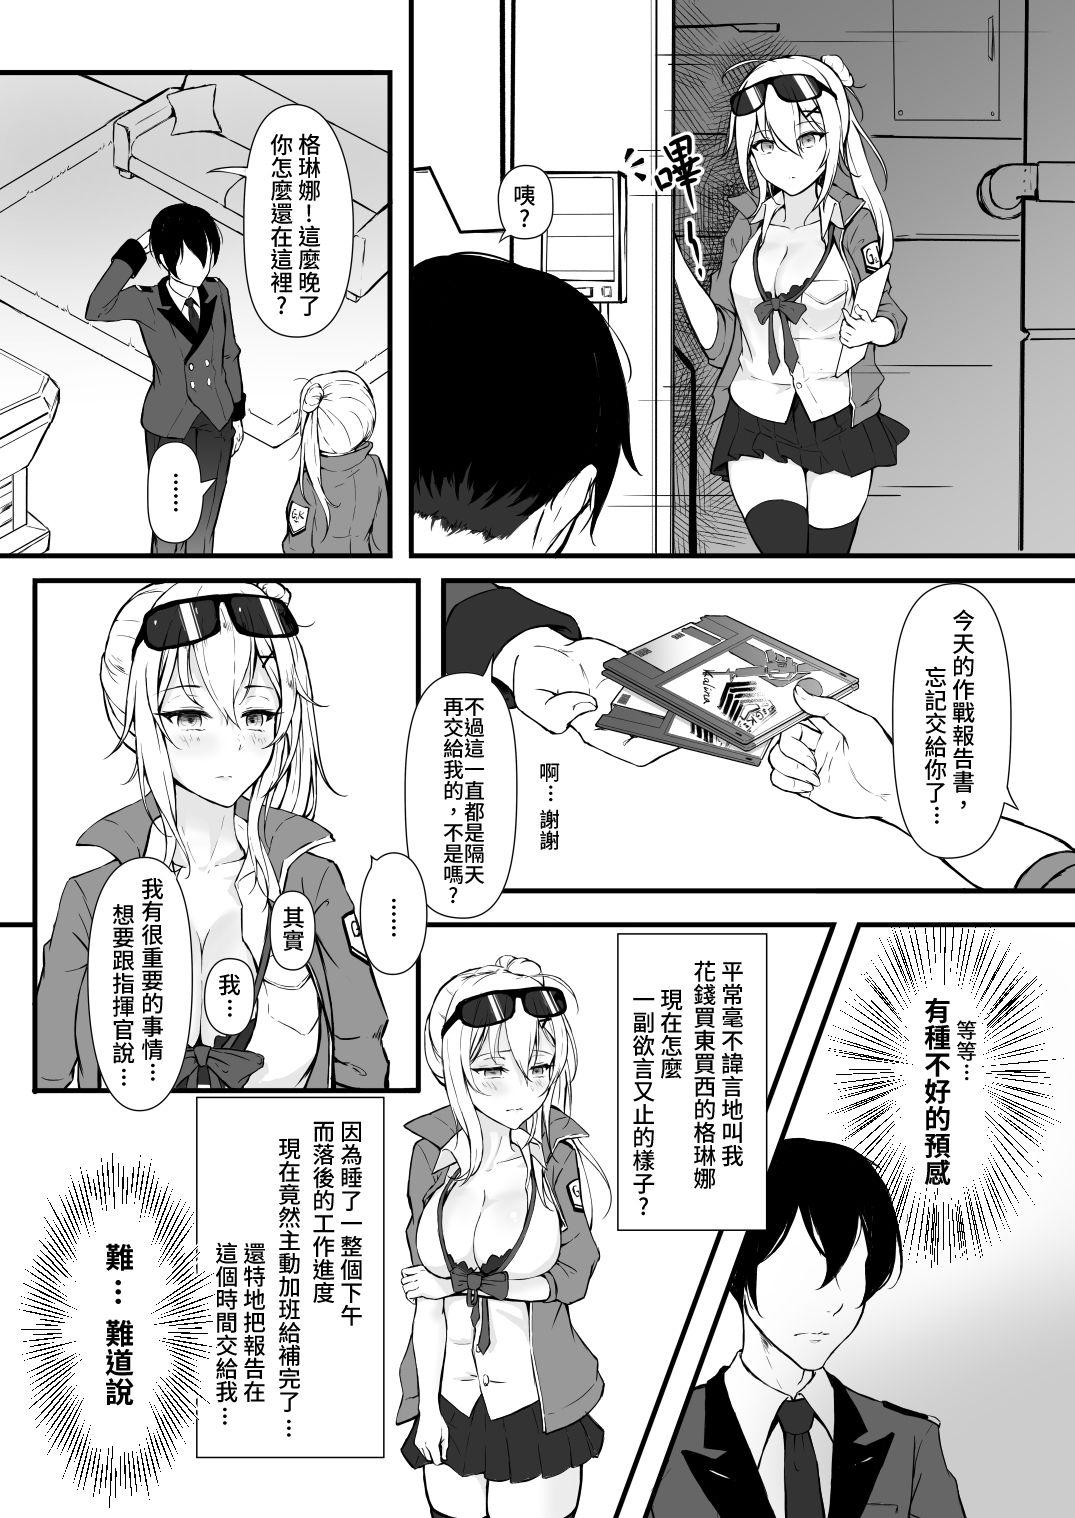 Euro Porn How Many Diamonds a Kiss Worth? - Girls frontline Wetpussy - Page 7